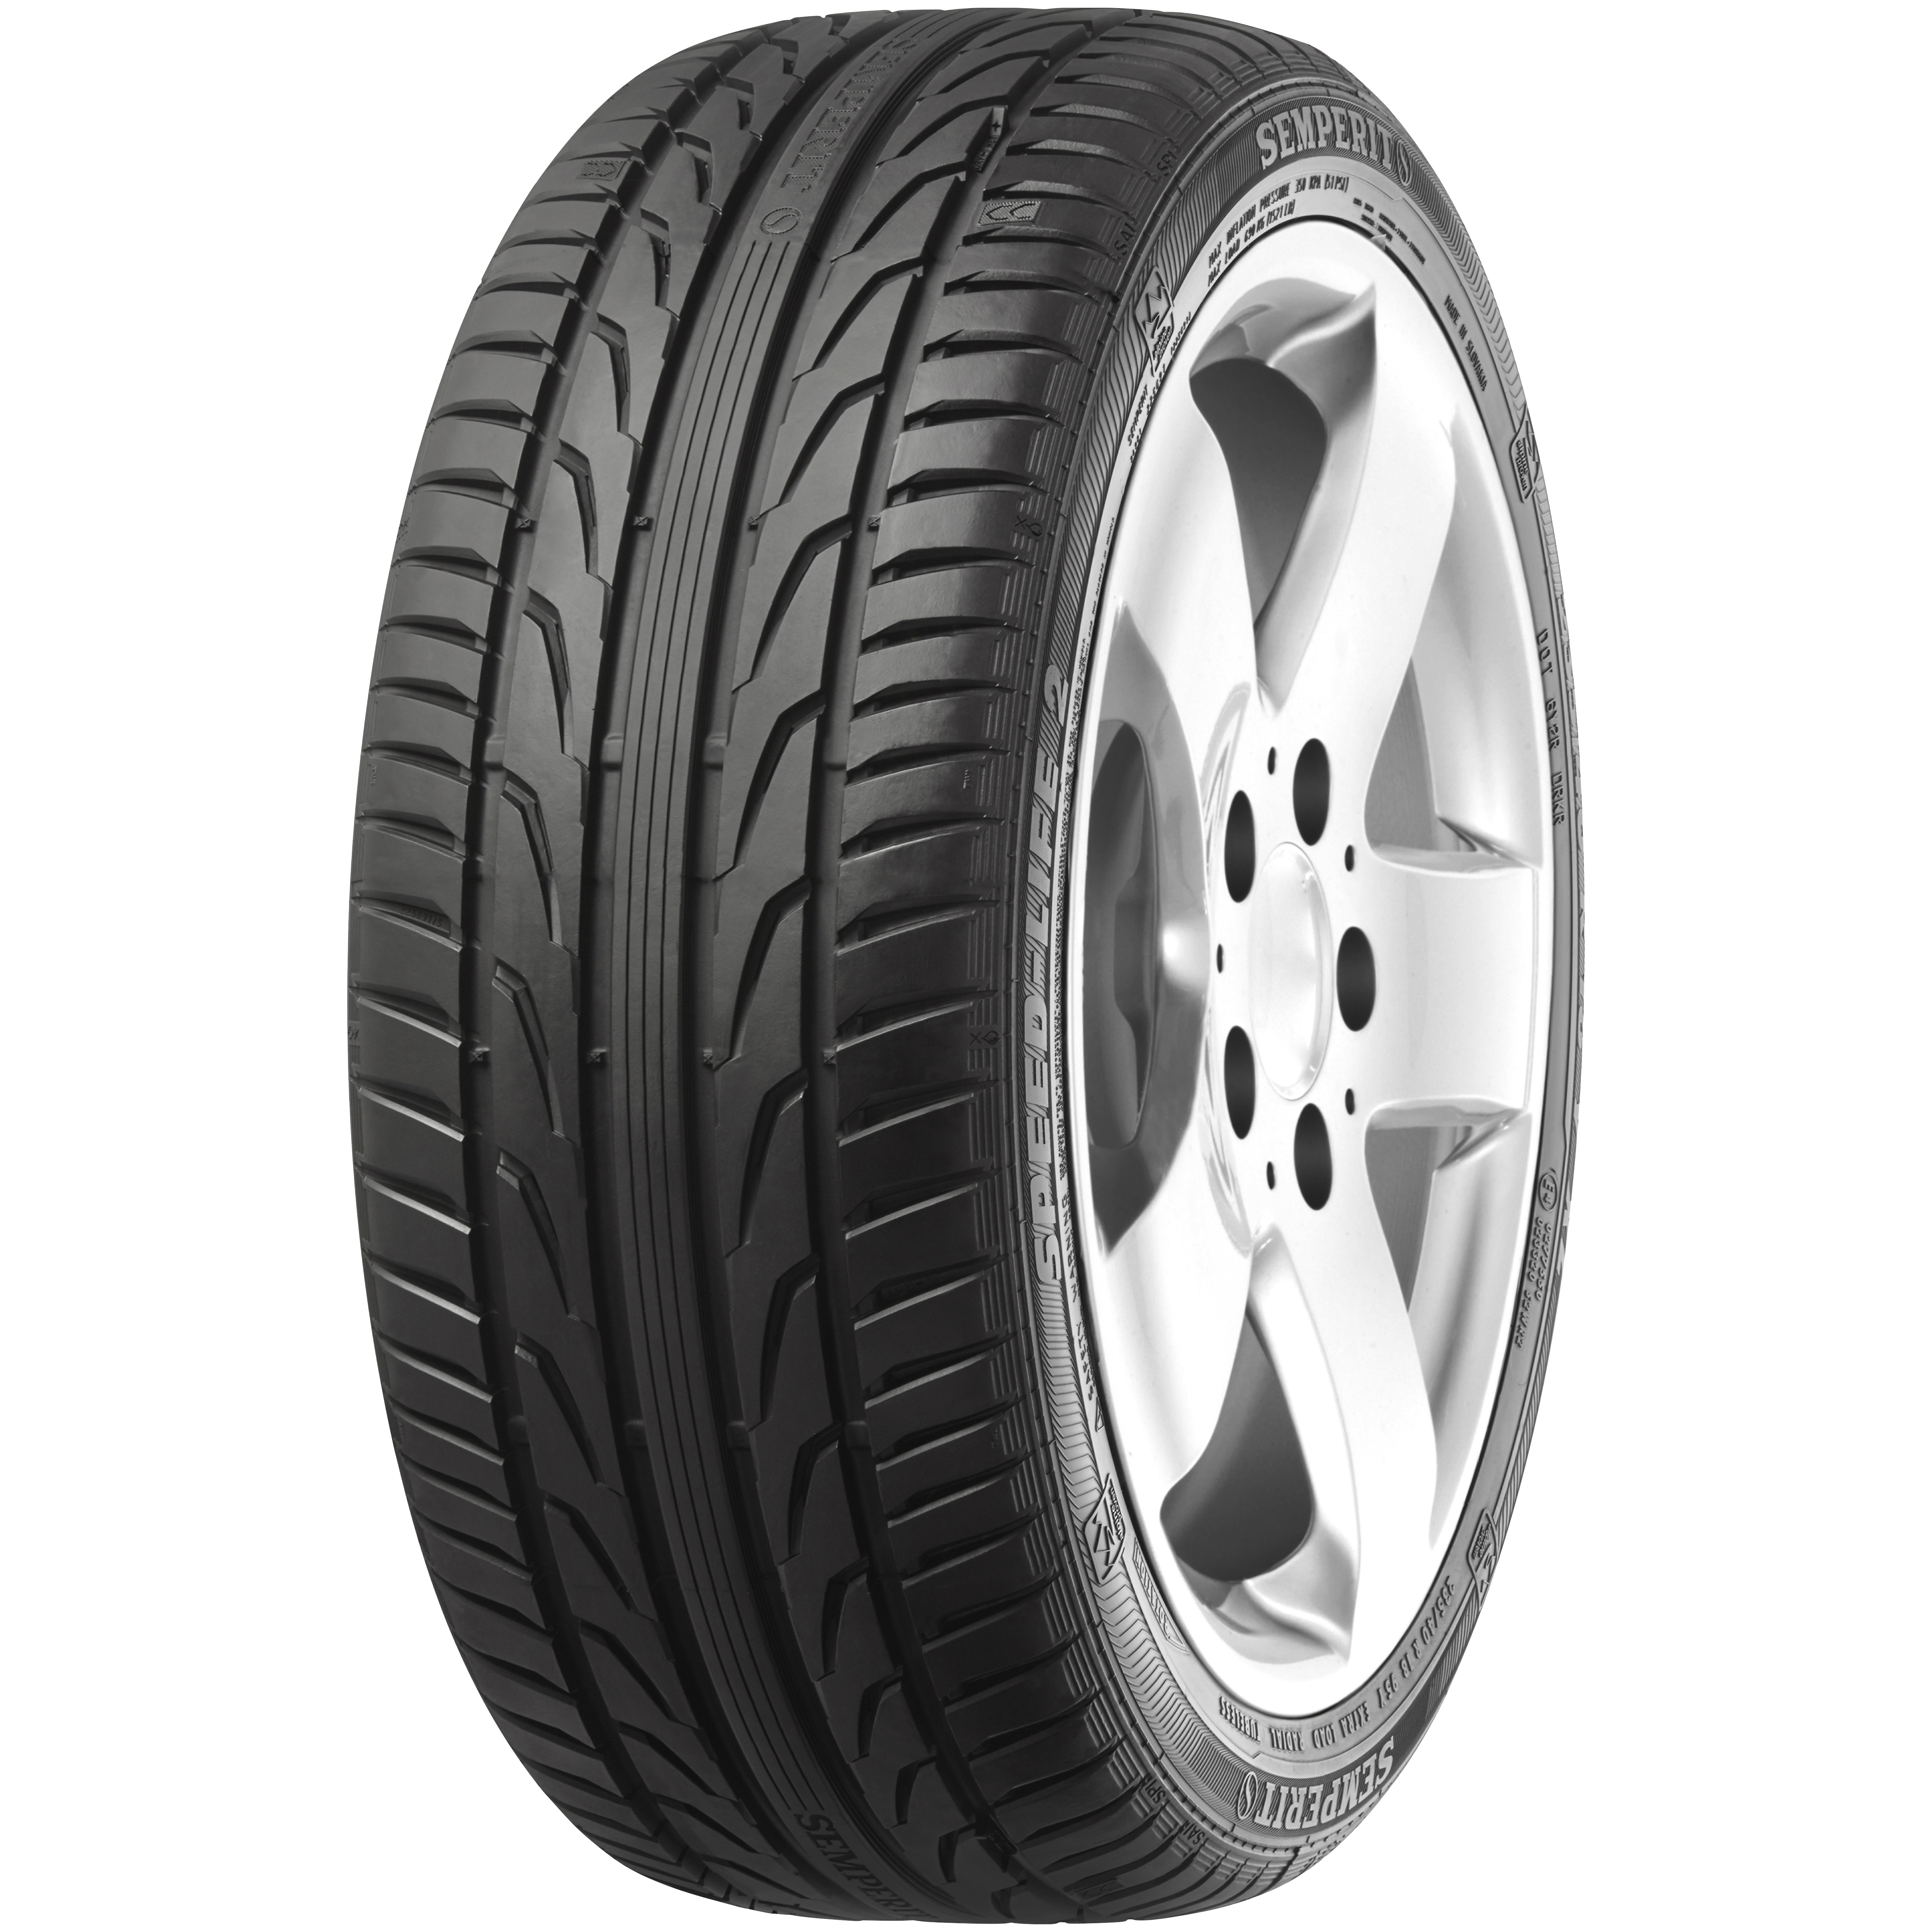 Semperit | SPEED-LIFE - tyre for 2 summer conditions alpine The